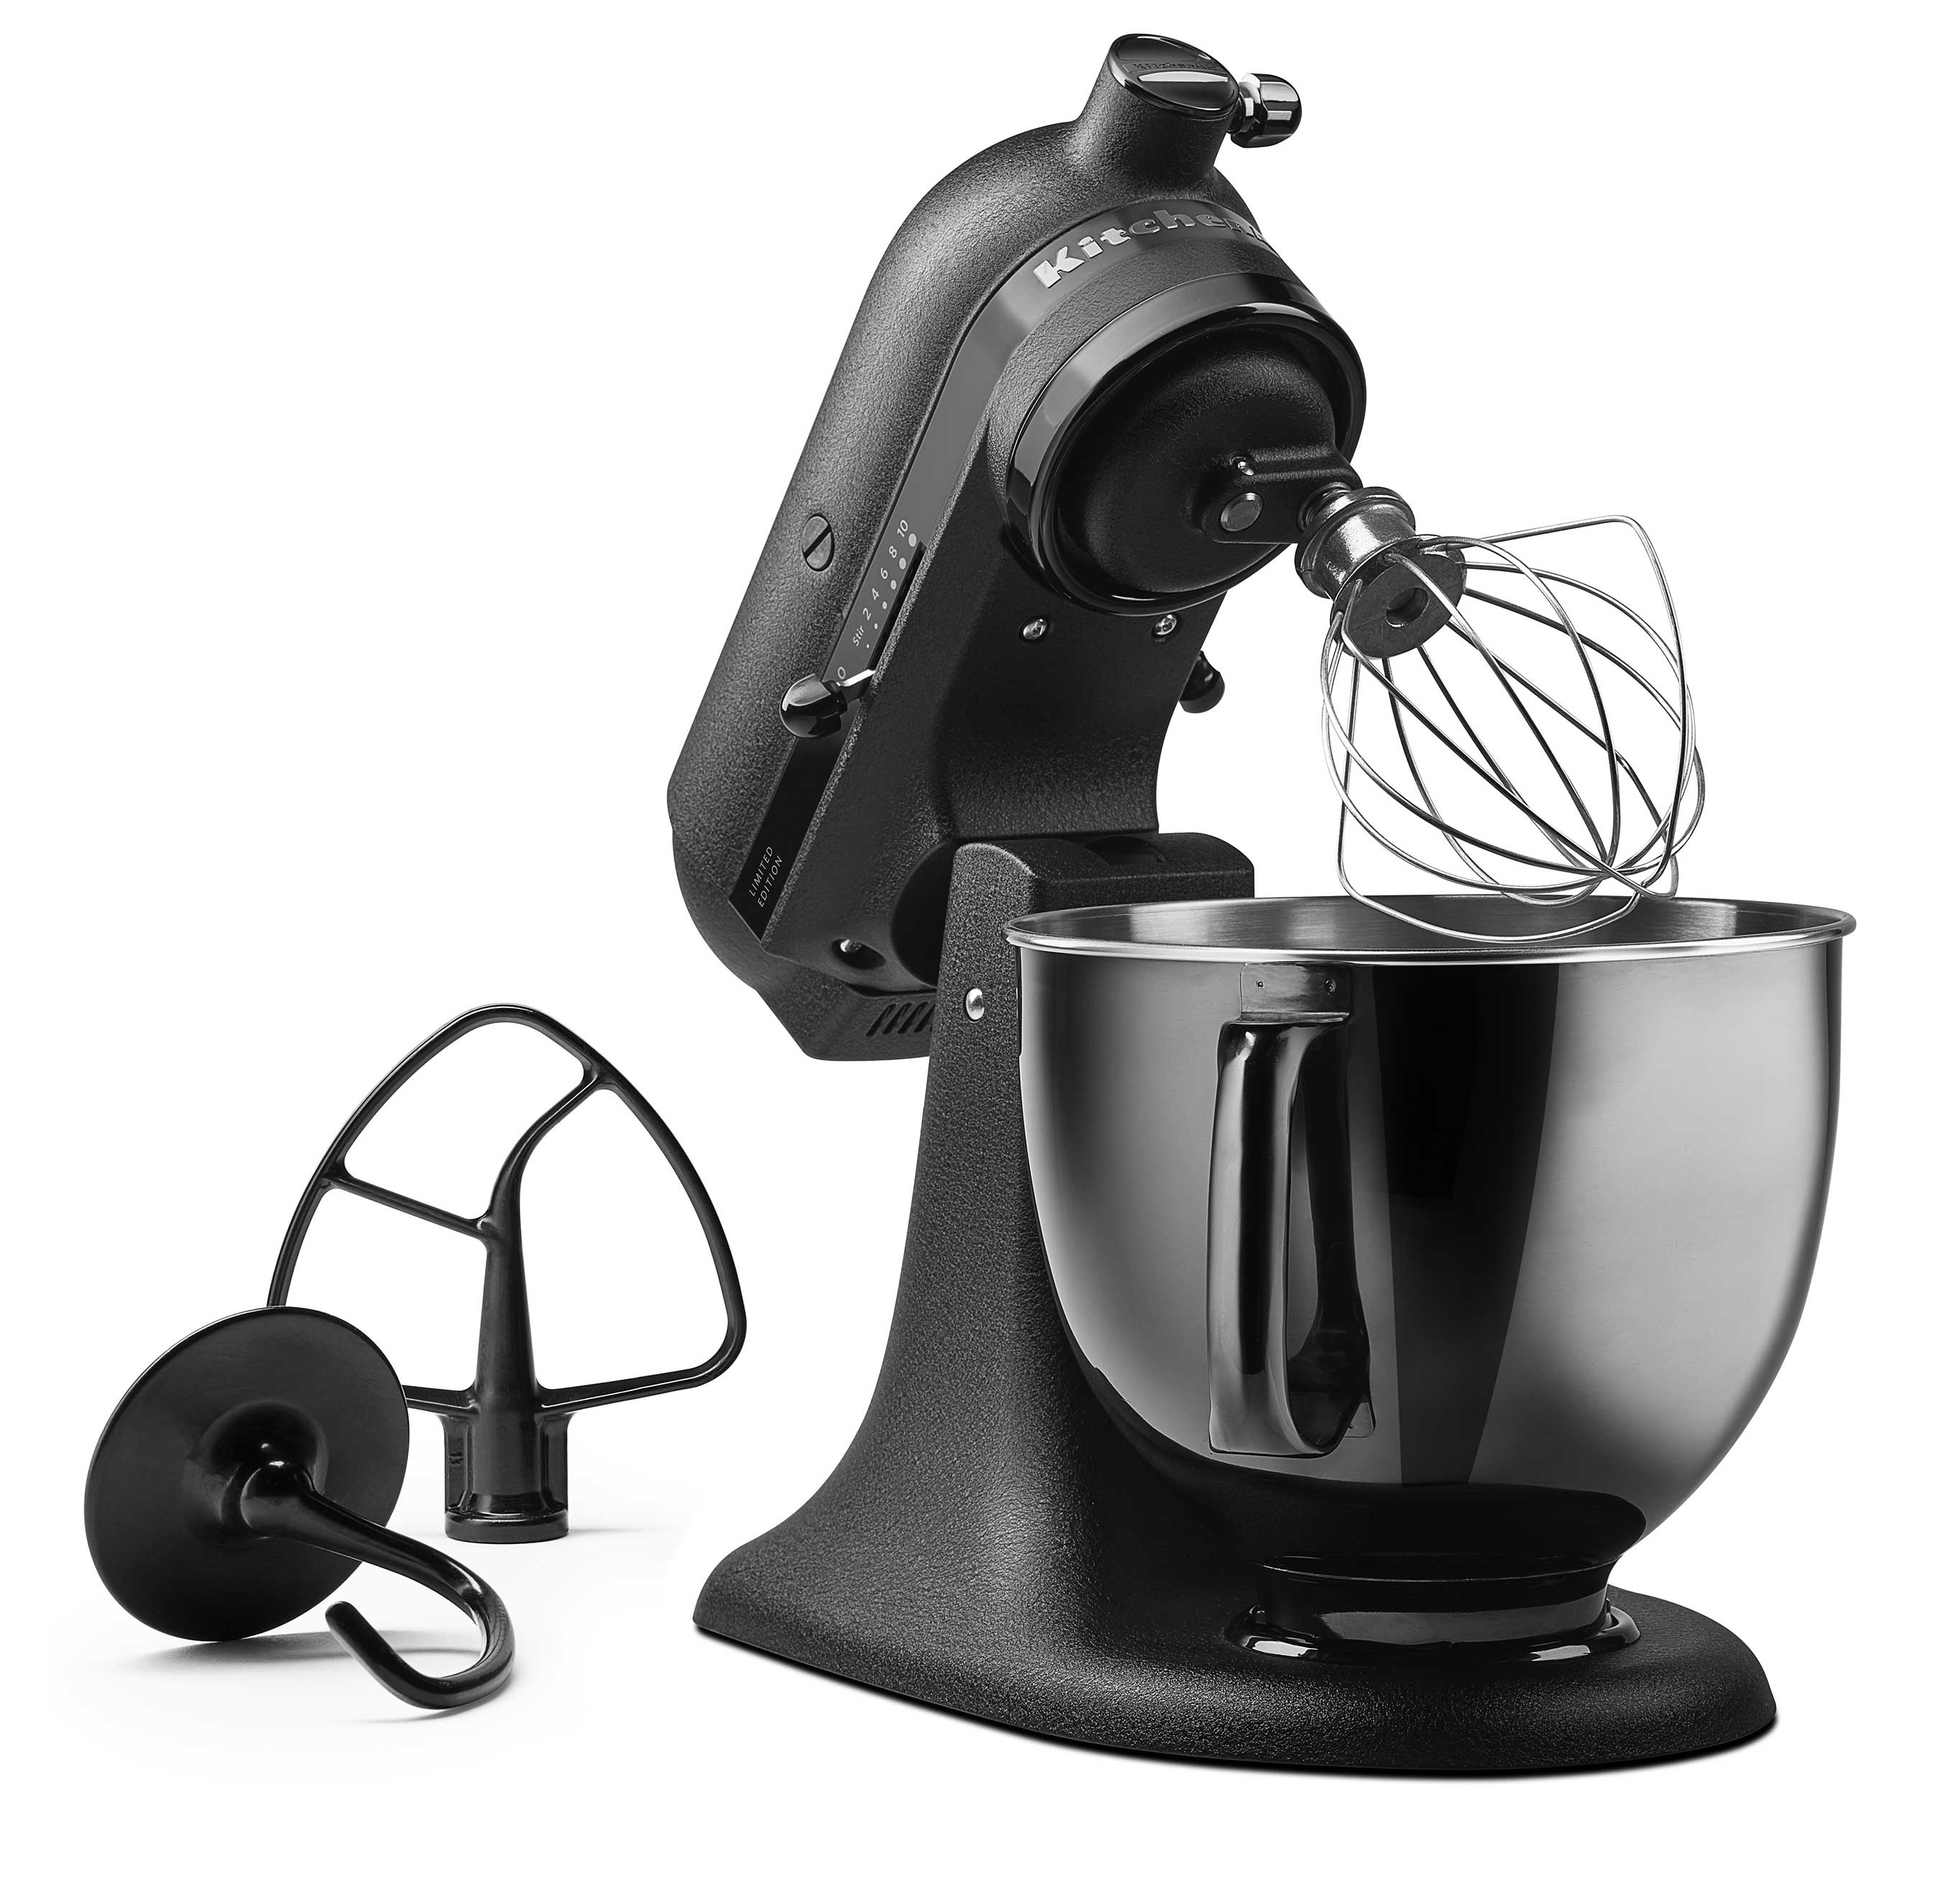 Kitchenaid Introduces Limited Edition Artisan® Black Tie Stand Mixer